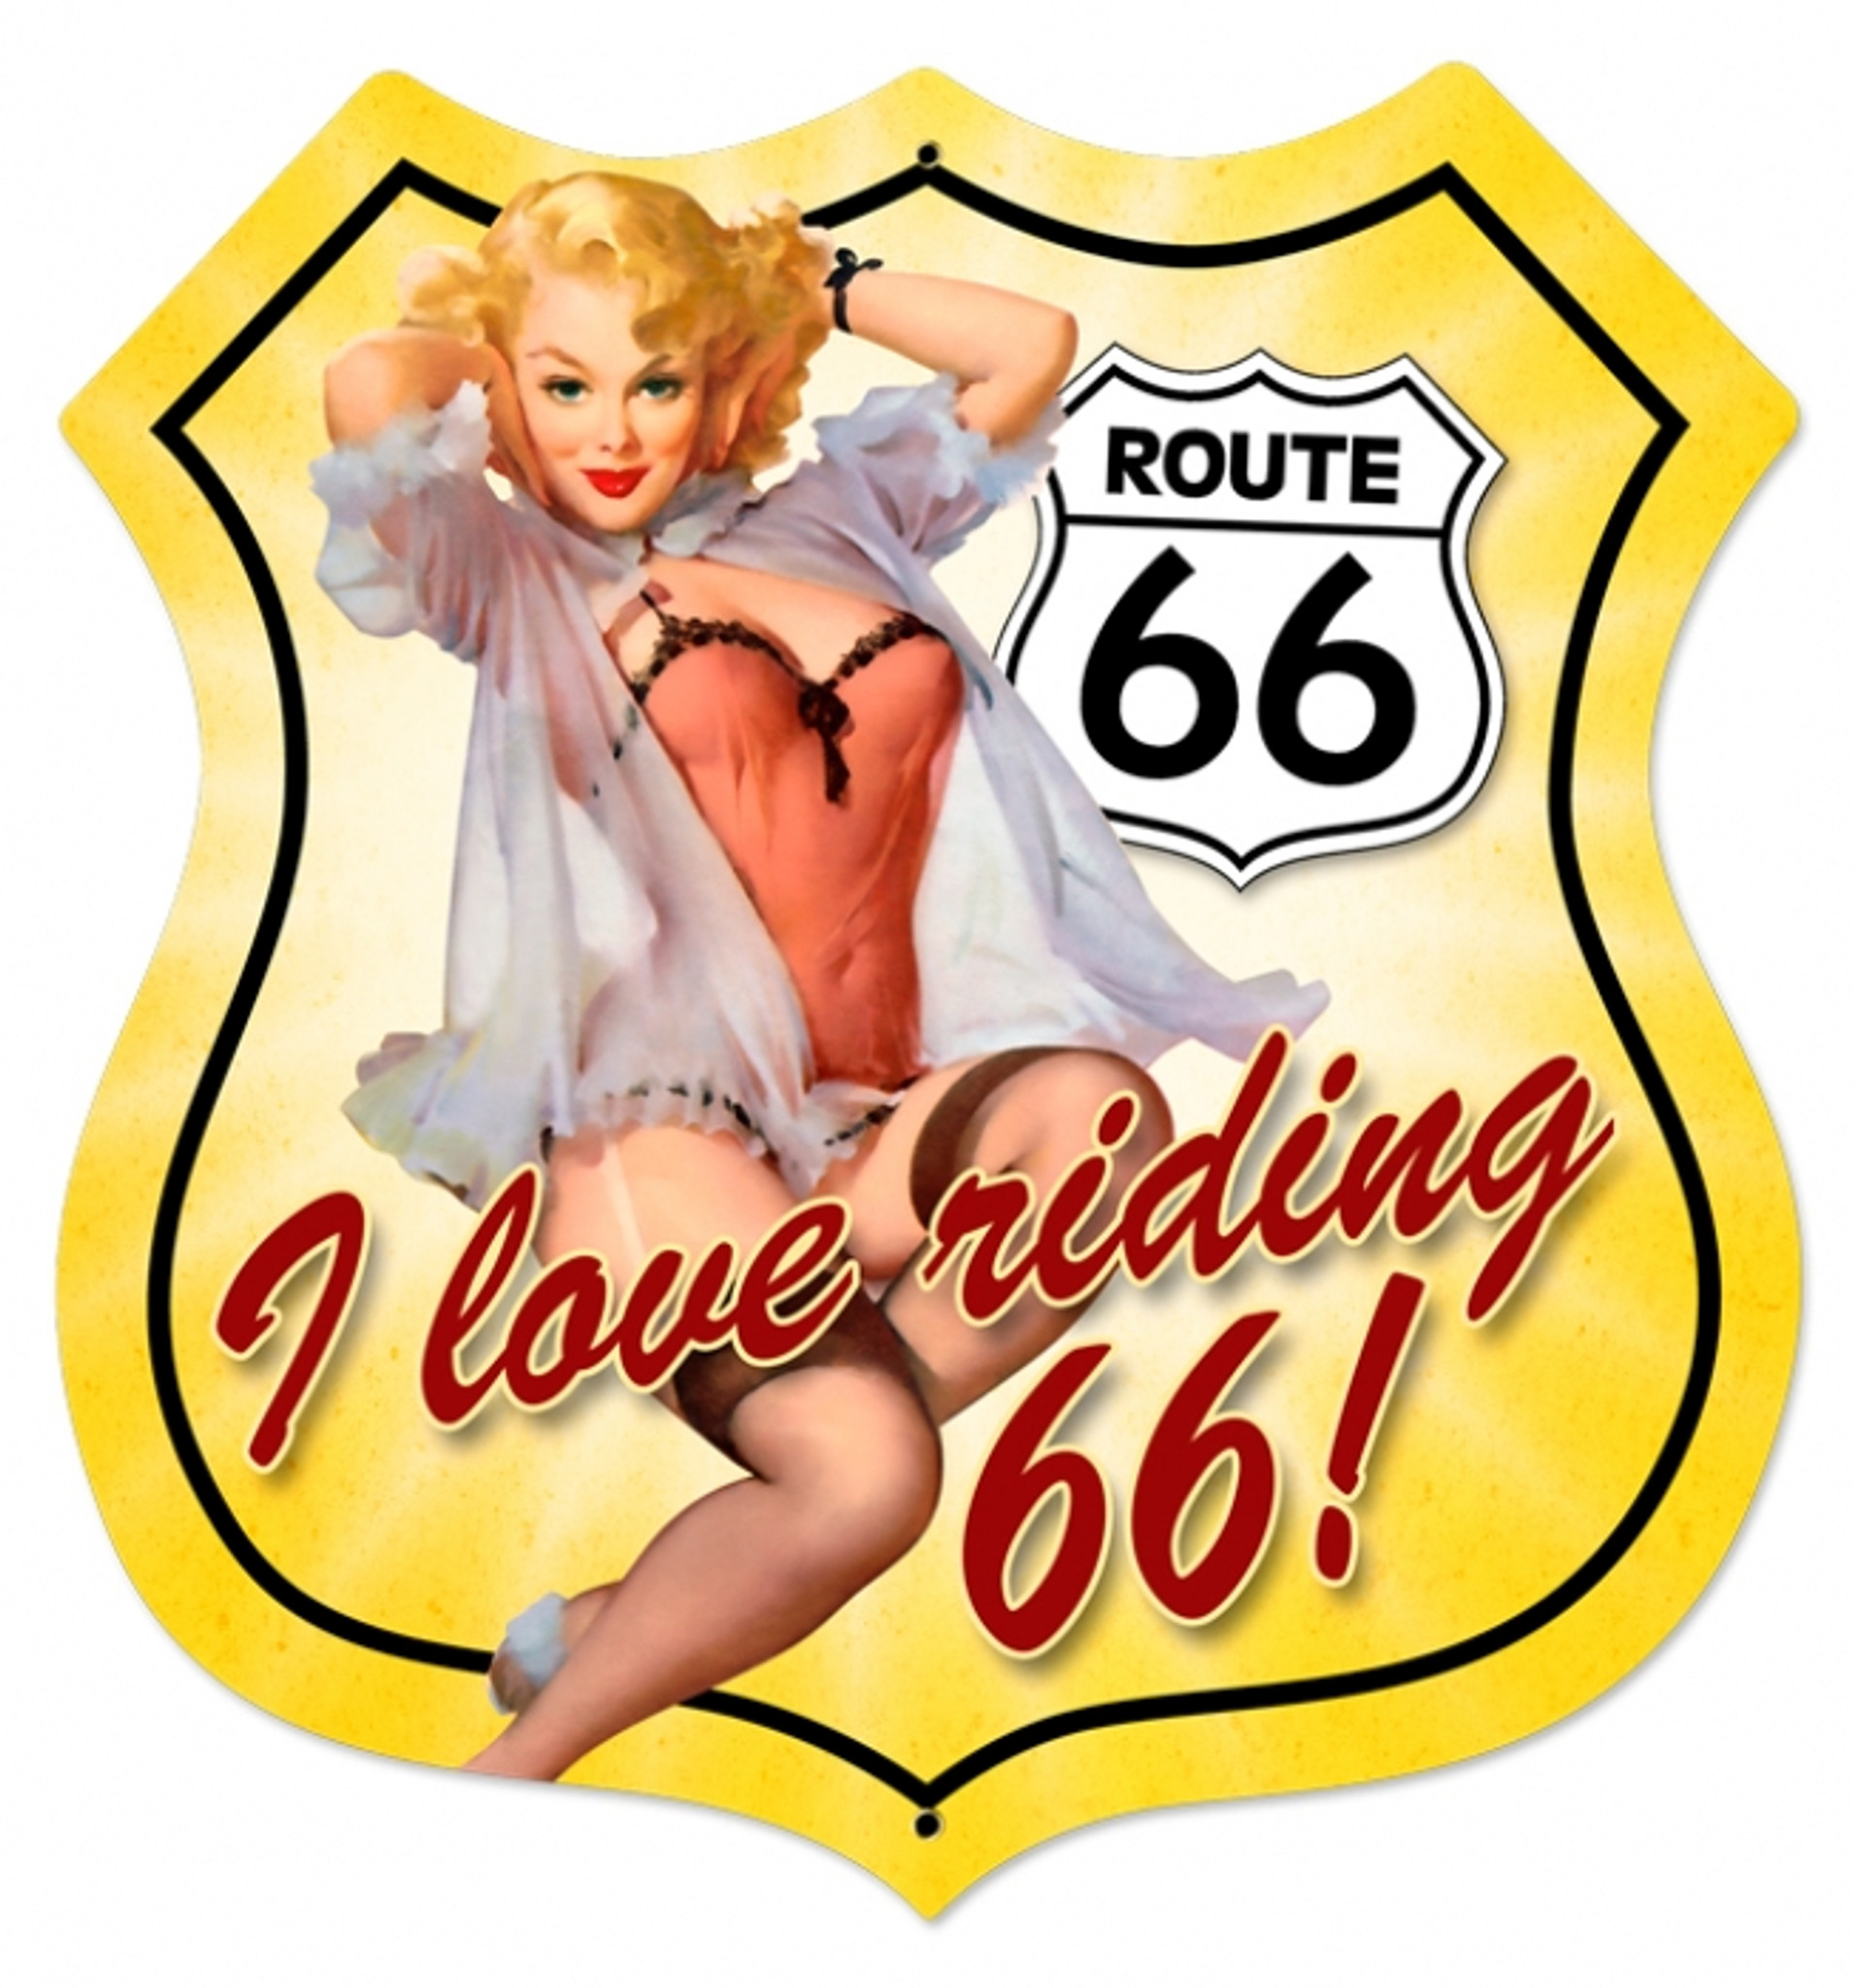 ROUTE 66 SIGN America Highway Famous Route 66 Pin Up Girl 